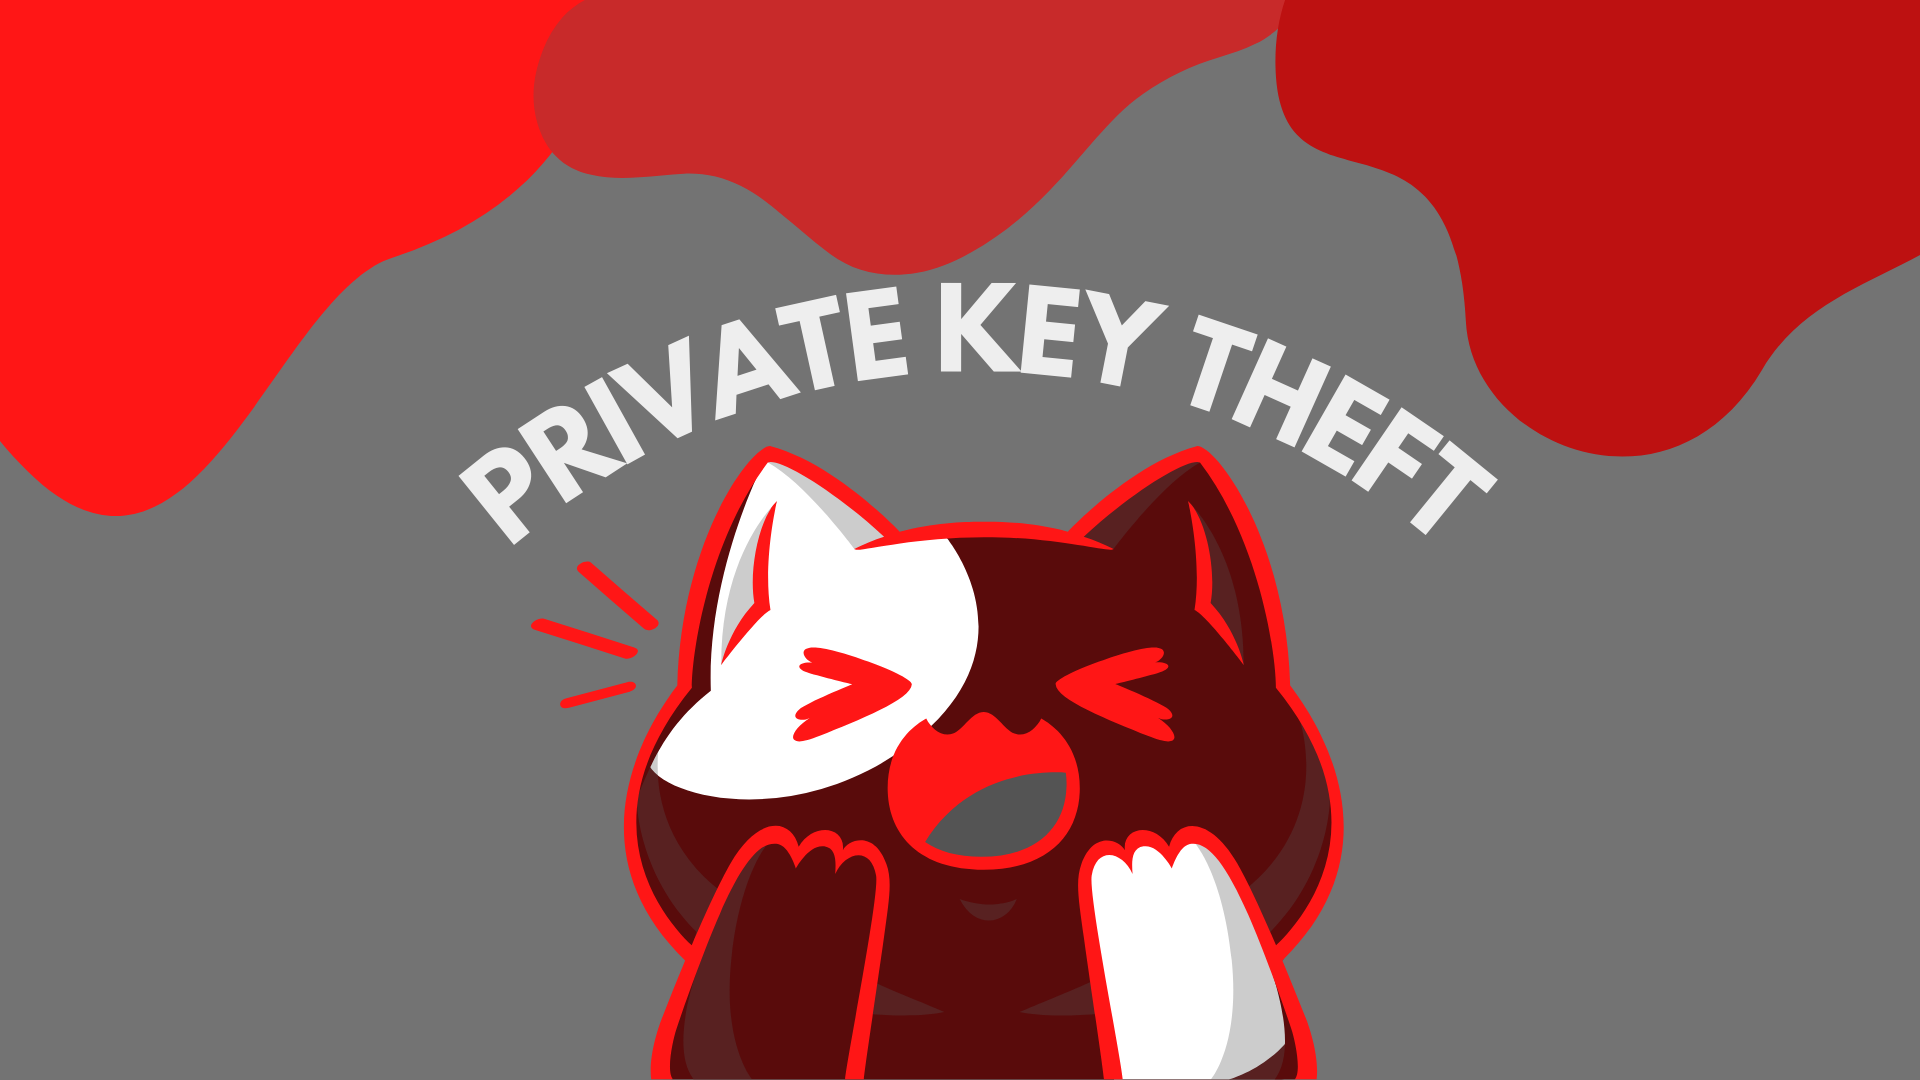 Private Key theft will harm your assets